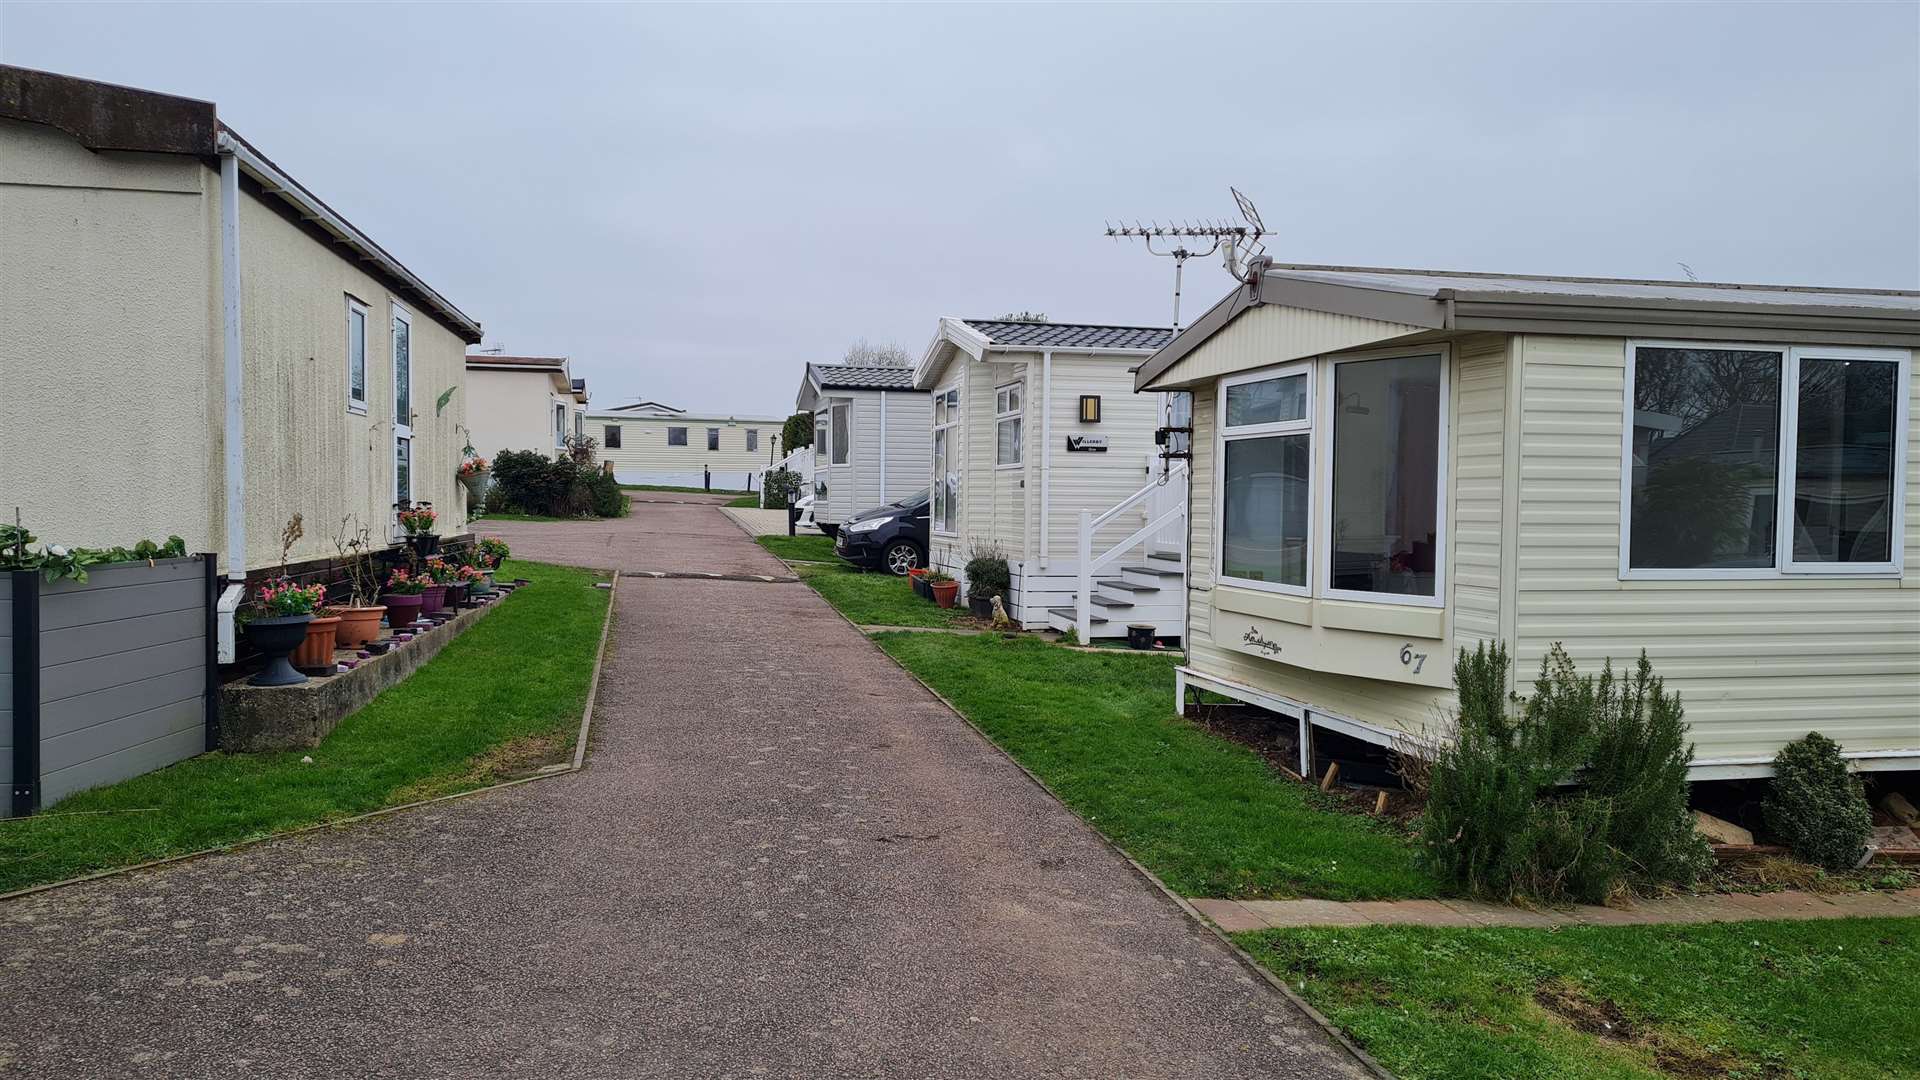 Bradgate Holiday Park in Margate has about 230 motorhomes and chalets